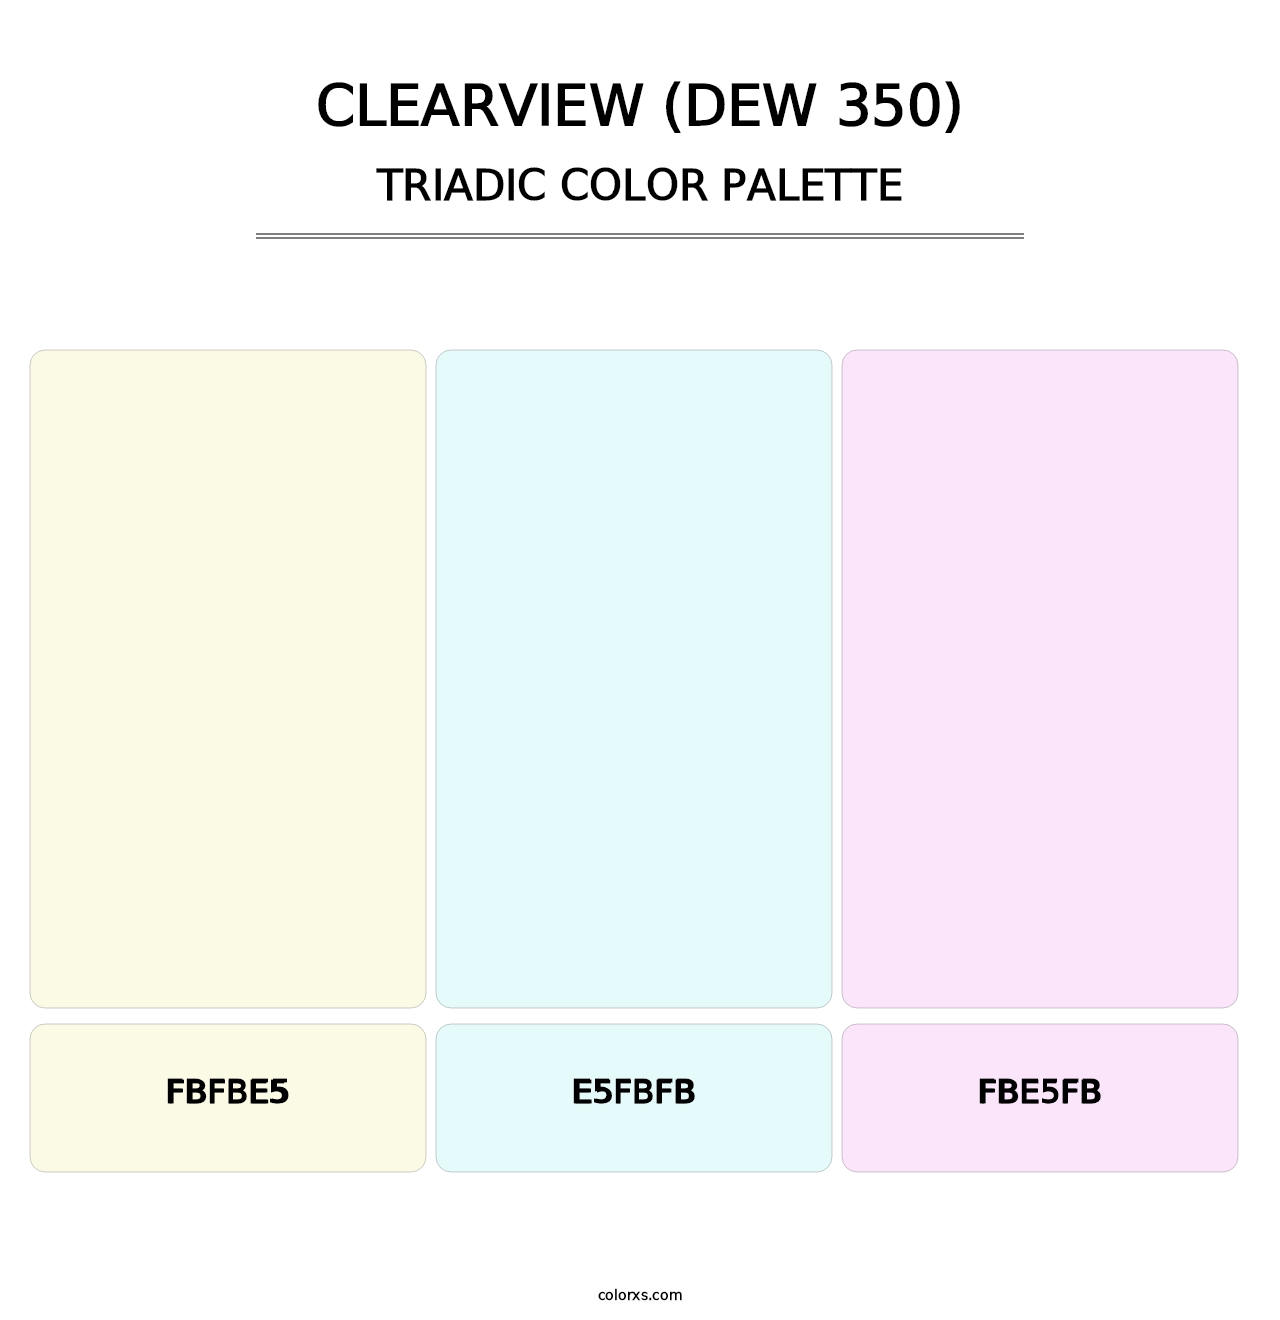 Clearview (DEW 350) - Triadic Color Palette